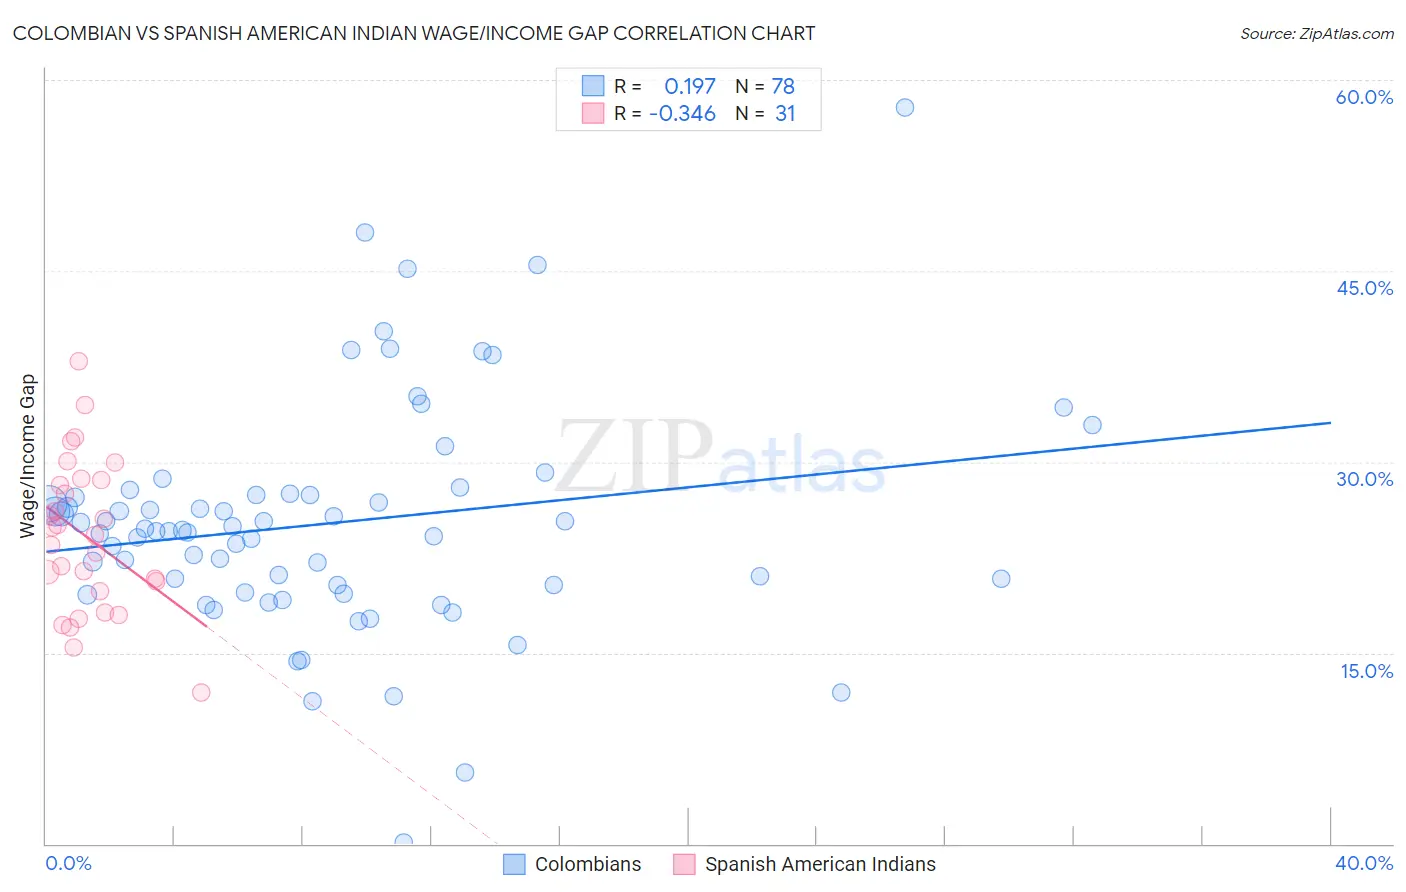 Colombian vs Spanish American Indian Wage/Income Gap